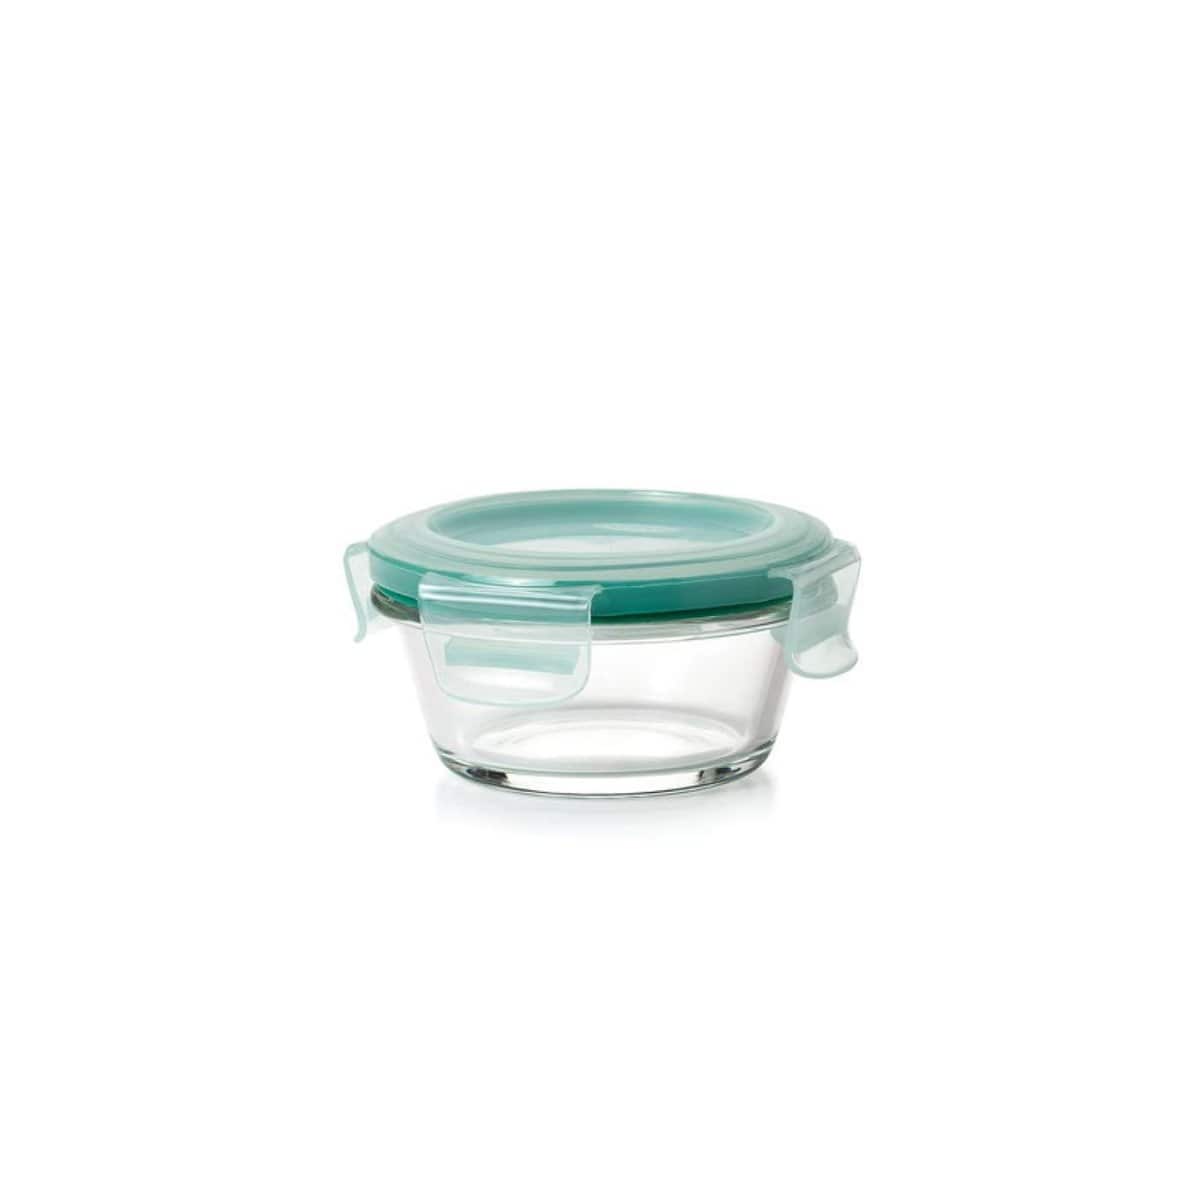 https://kitchenandcompany.com/cdn/shop/products/oxo-oxo-good-grips-snap-glass-round-container-1-cup-719812047485-19594524229792_1200x.jpg?v=1628049039